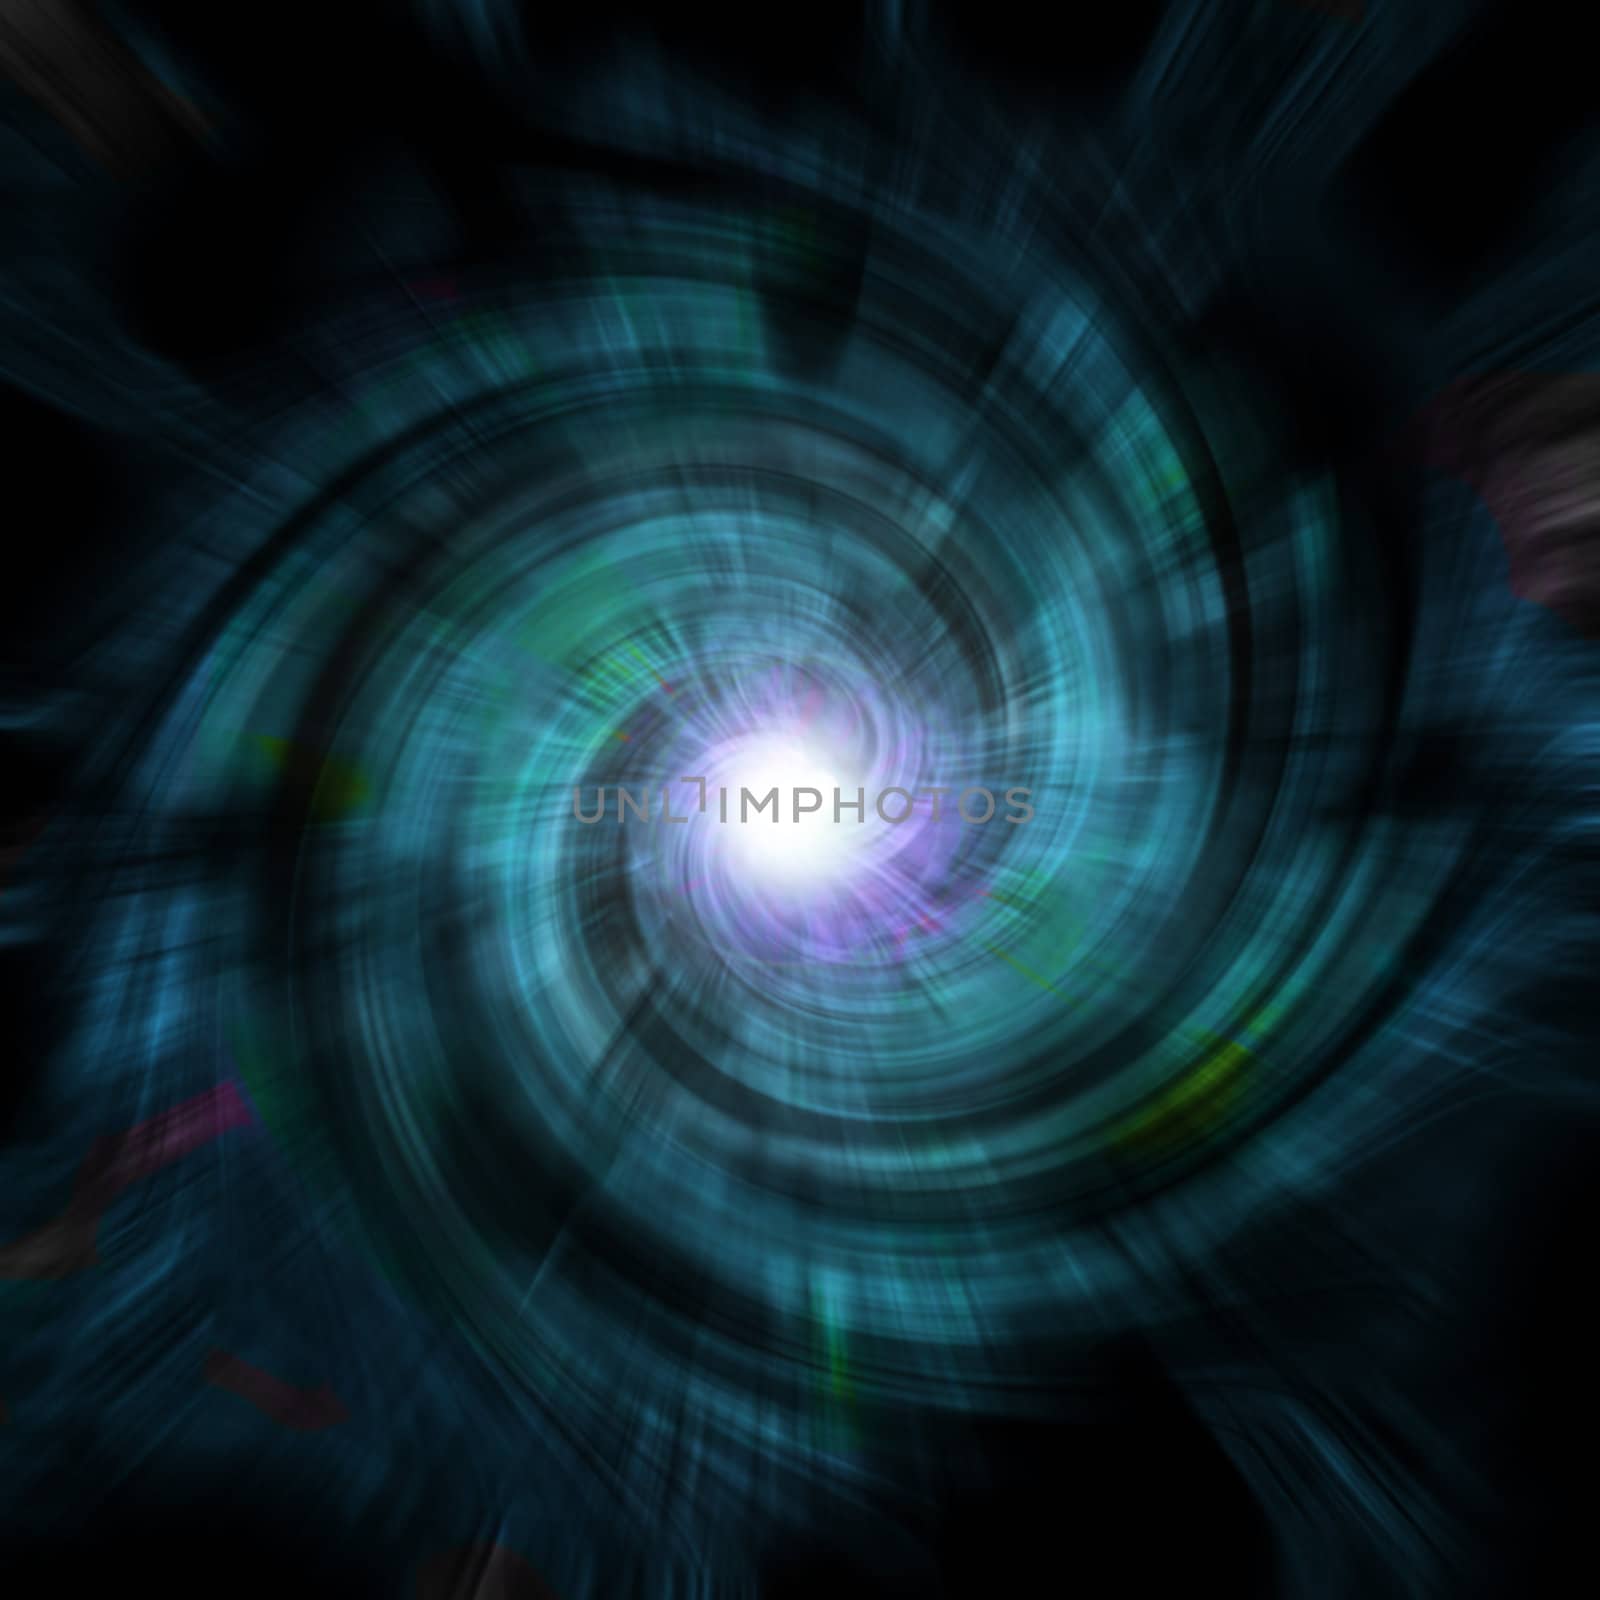 A blue-ish, spiraling vortex background - complete with a central lens flare at the focal point.  